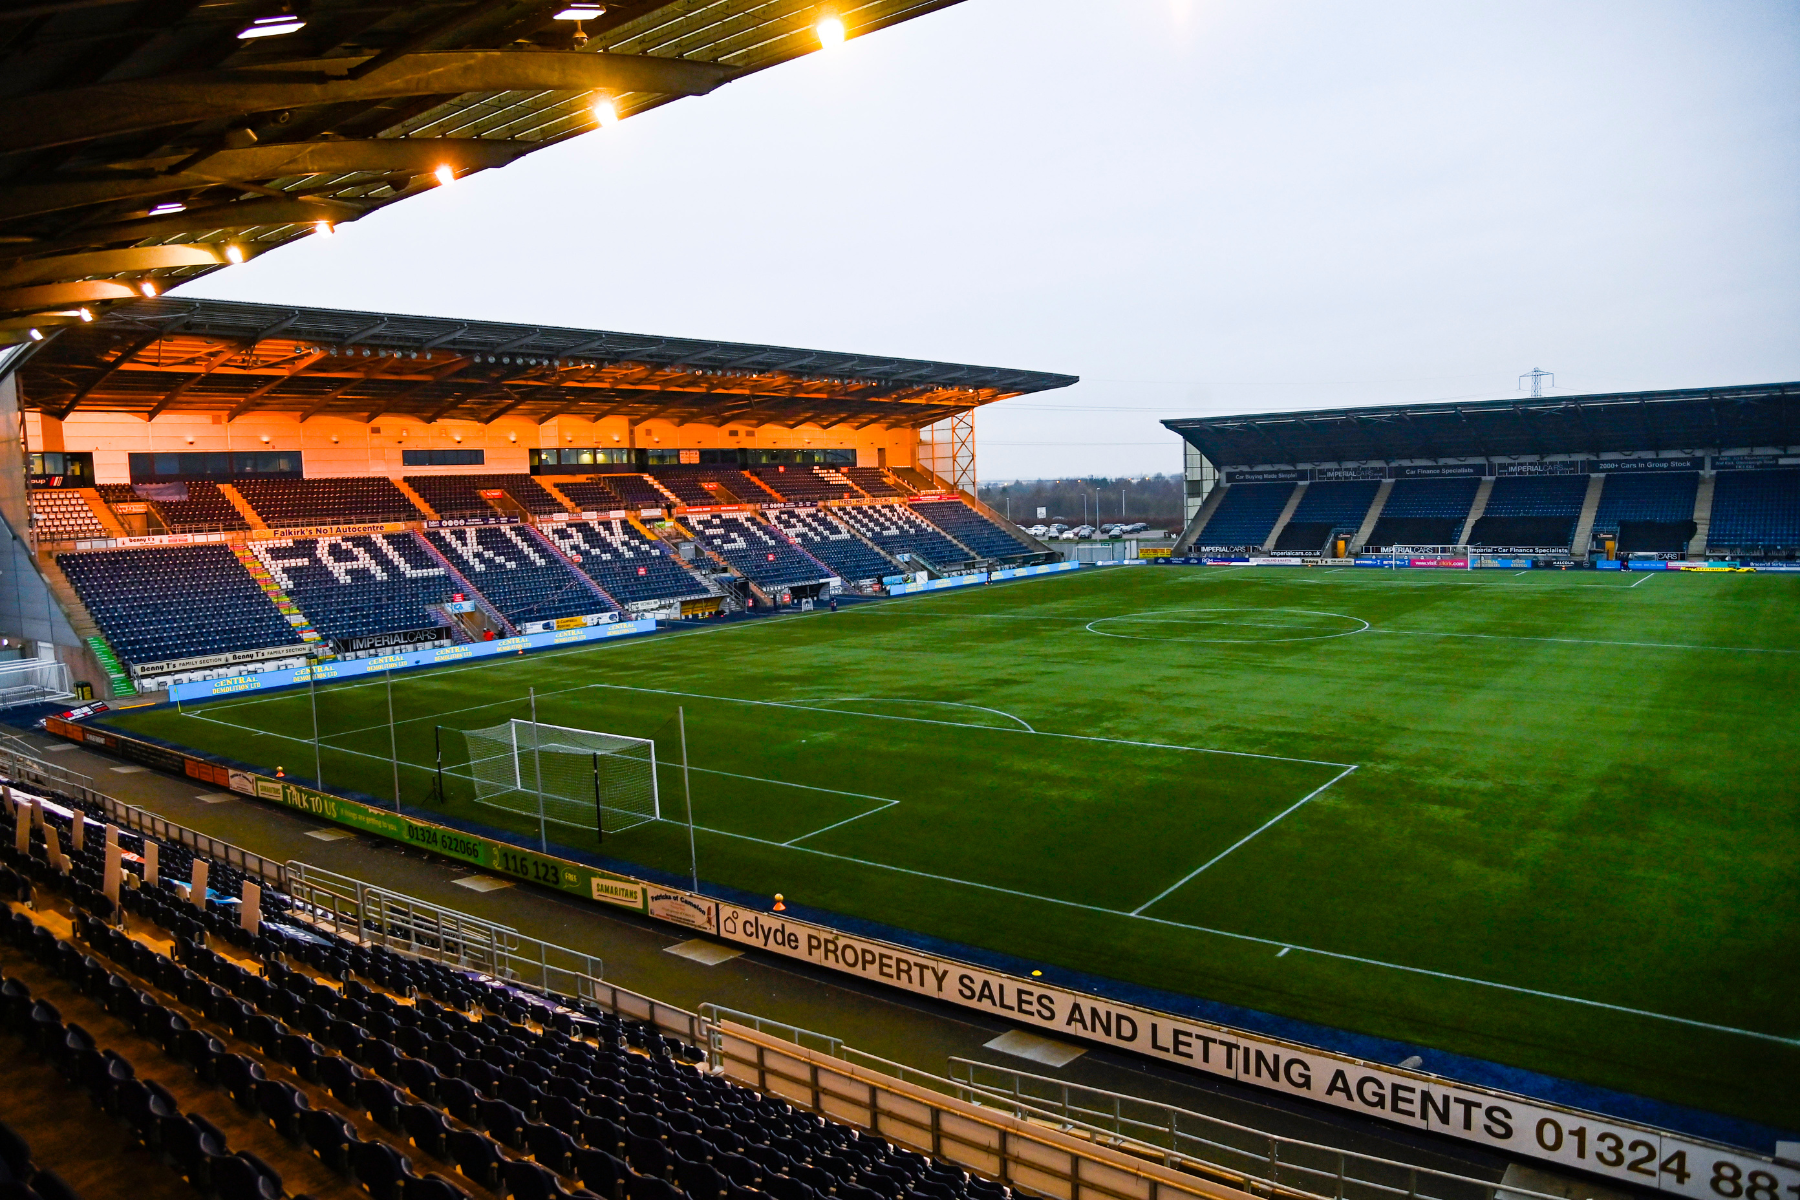 Falkirk to issue formal apology to Hibs over 'homophobic'chants during Premier Sports Cup tie